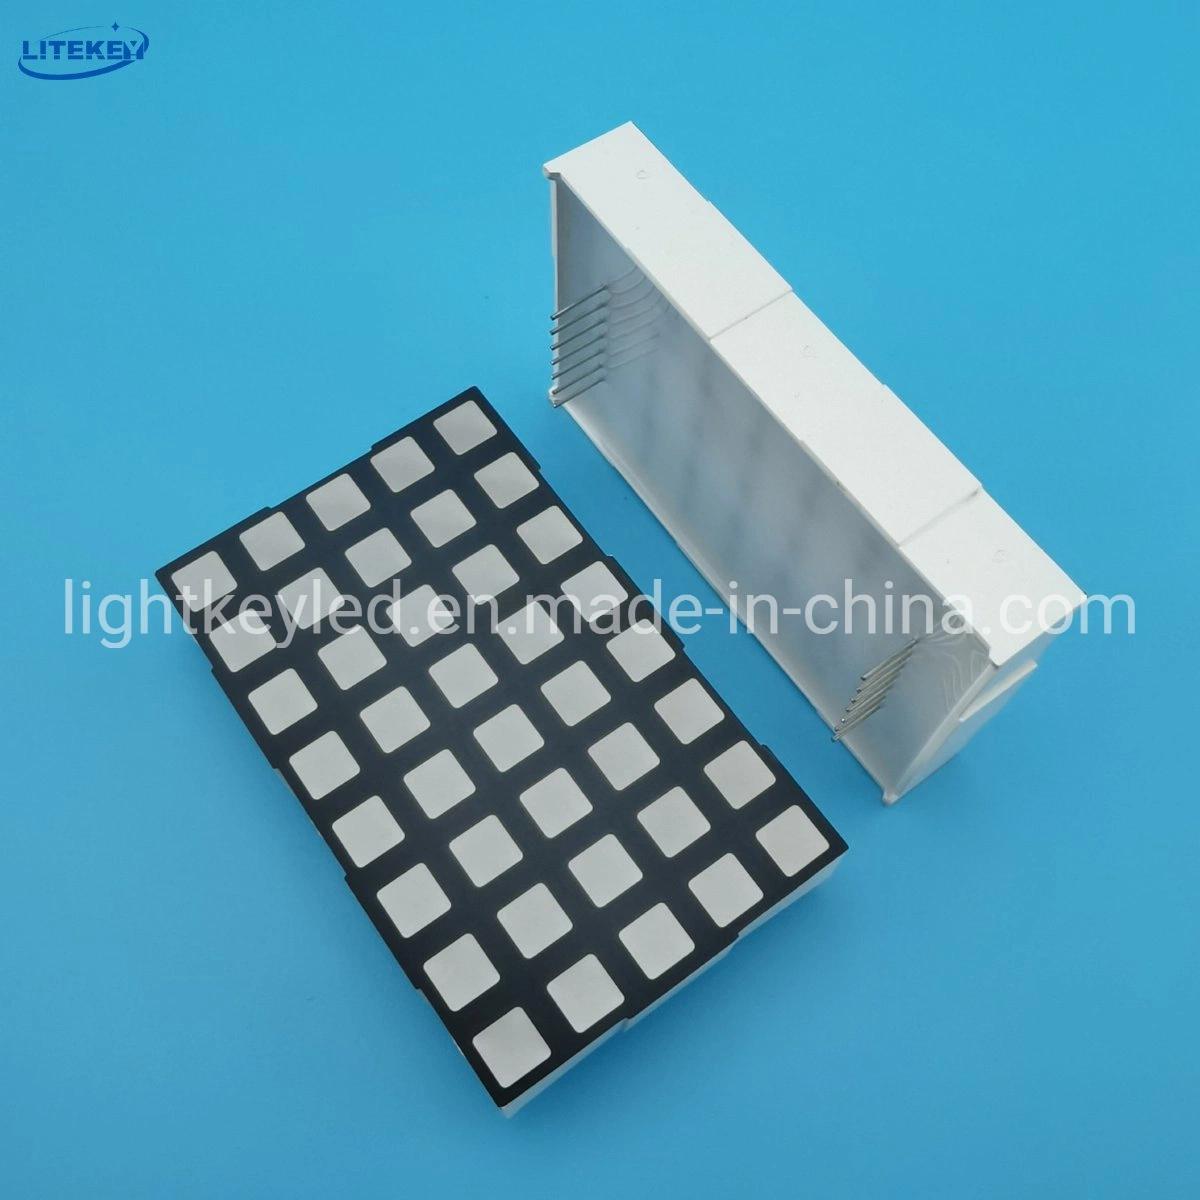 1.2 Inch 5X7 LED Square DOT Matrix with RoHS From Expert Manufacturer